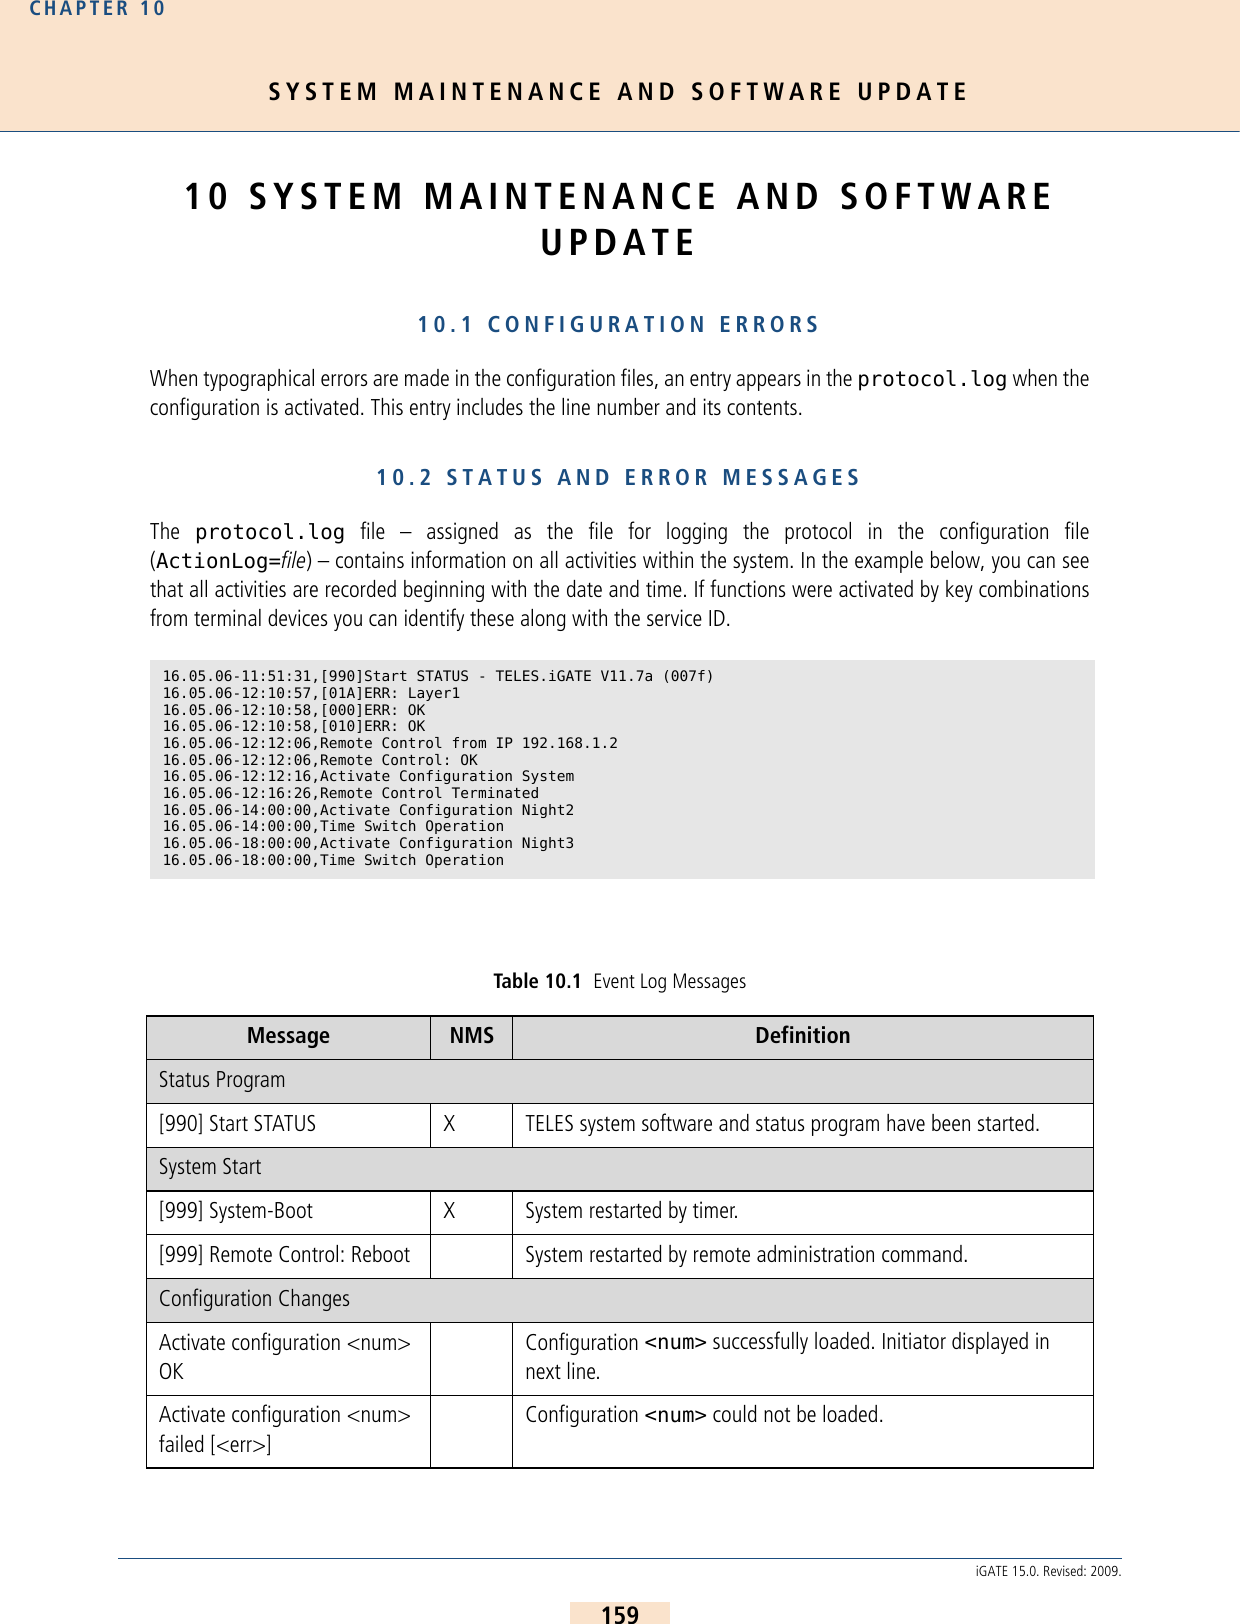 SYSTEM MAINTENANCE AND SOFTWARE UPDATECHAPTER 10159iGATE 15.0. Revised: 2009.10 SYSTEM MAINTENANCE AND SOFTWARE UPDATE10.1 CONFIGURATION ERRORSWhen typographical errors are made in the configuration files, an entry appears in the protocol.log when theconfiguration is activated. This entry includes the line number and its contents.10.2 STATUS AND ERROR MESSAGESThe  protocol.log file – assigned as the file for logging the protocol in the configuration file(ActionLog=file) – contains information on all activities within the system. In the example below, you can seethat all activities are recorded beginning with the date and time. If functions were activated by key combinationsfrom terminal devices you can identify these along with the service ID.16.05.06-11:51:31,[990]Start STATUS - TELES.iGATE V11.7a (007f)16.05.06-12:10:57,[01A]ERR: Layer1  16.05.06-12:10:58,[000]ERR: OK   16.05.06-12:10:58,[010]ERR: OK   16.05.06-12:12:06,Remote Control from IP 192.168.1.216.05.06-12:12:06,Remote Control: OK  16.05.06-12:12:16,Activate Configuration System 16.05.06-12:16:26,Remote Control Terminated  16.05.06-14:00:00,Activate Configuration Night2 16.05.06-14:00:00,Time Switch Operation  16.05.06-18:00:00,Activate Configuration Night3 16.05.06-18:00:00,Time Switch Operation Table 10.1  Event Log Messages Message NMS  DefinitionStatus Program[990] Start STATUS  X TELES system software and status program have been started. System Start[999] System-Boot X System restarted by timer.[999] Remote Control: Reboot System restarted by remote administration command.Configuration ChangesActivate configuration &lt;num&gt; OKConfiguration &lt;num&gt; successfully loaded. Initiator displayed in next line.Activate configuration &lt;num&gt; failed [&lt;err&gt;]Configuration &lt;num&gt; could not be loaded. 